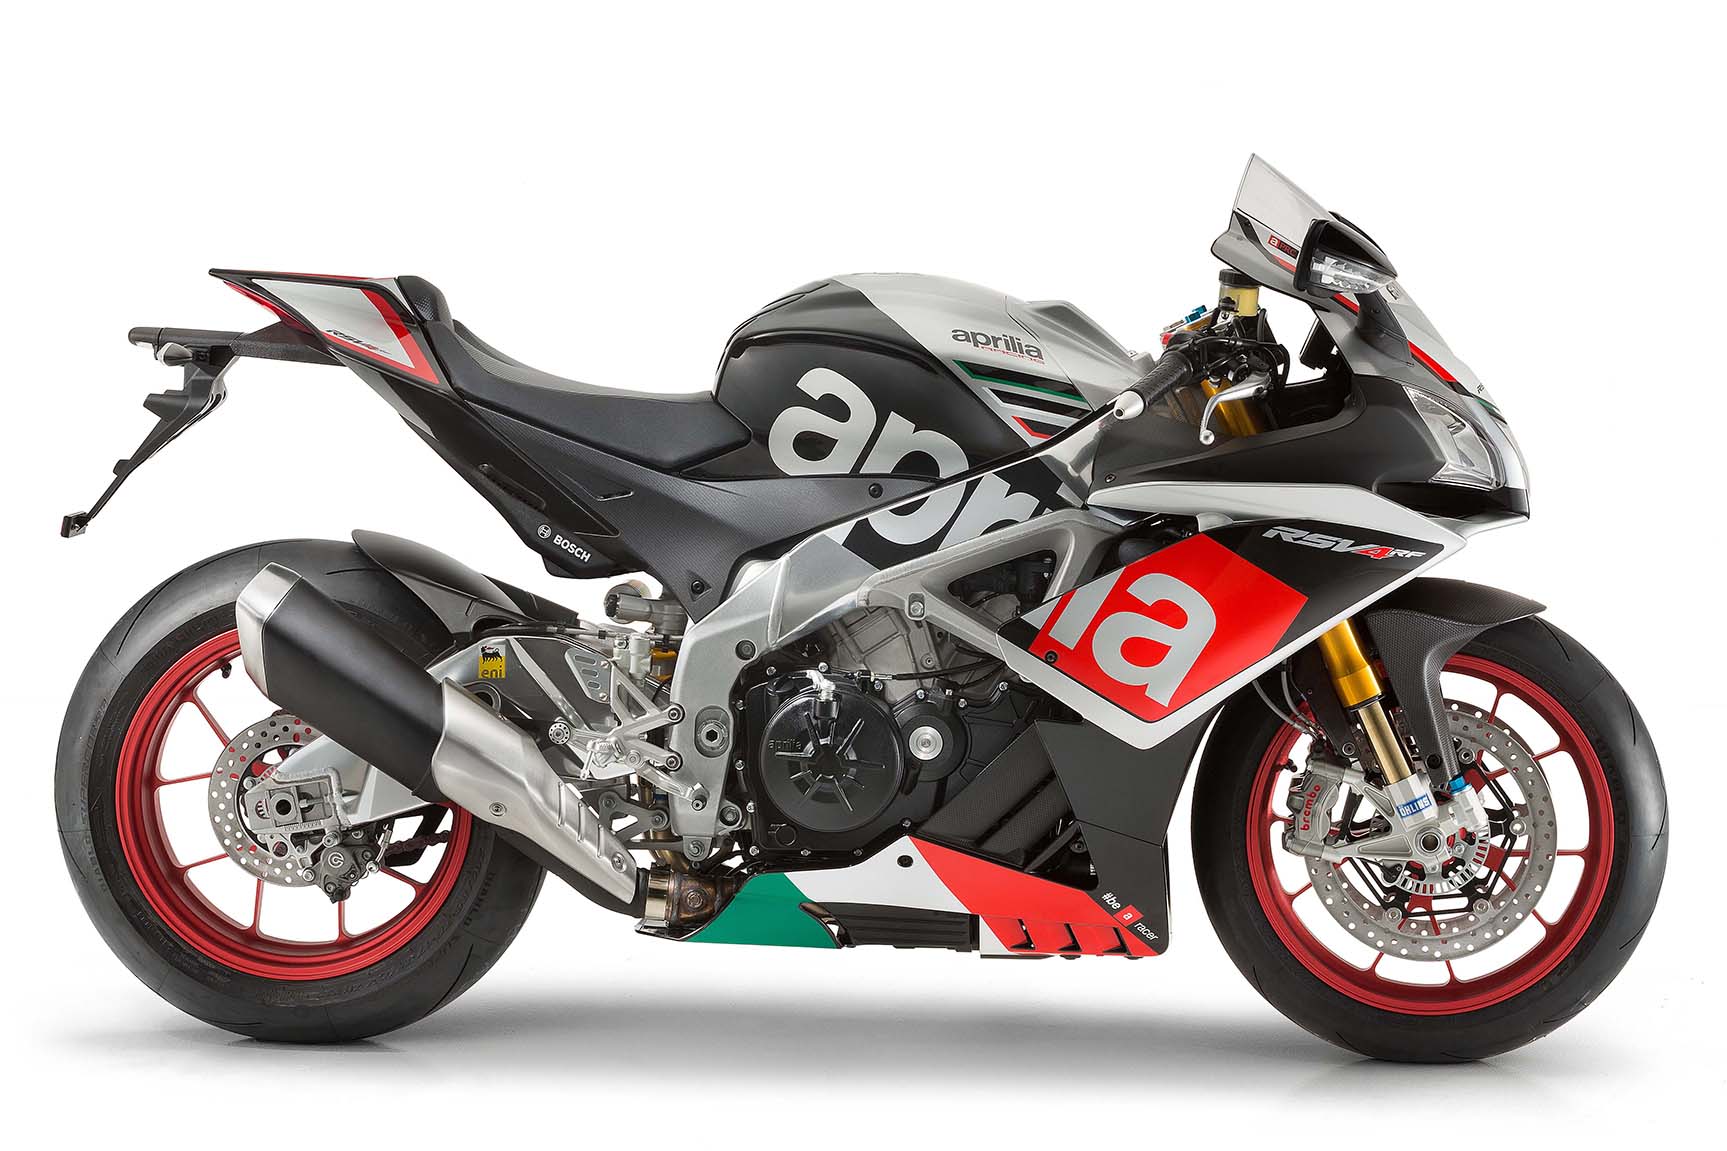 Aprilia updates the RSV4 and introduces a 'Factory Works' version, the RSV4 R-FW